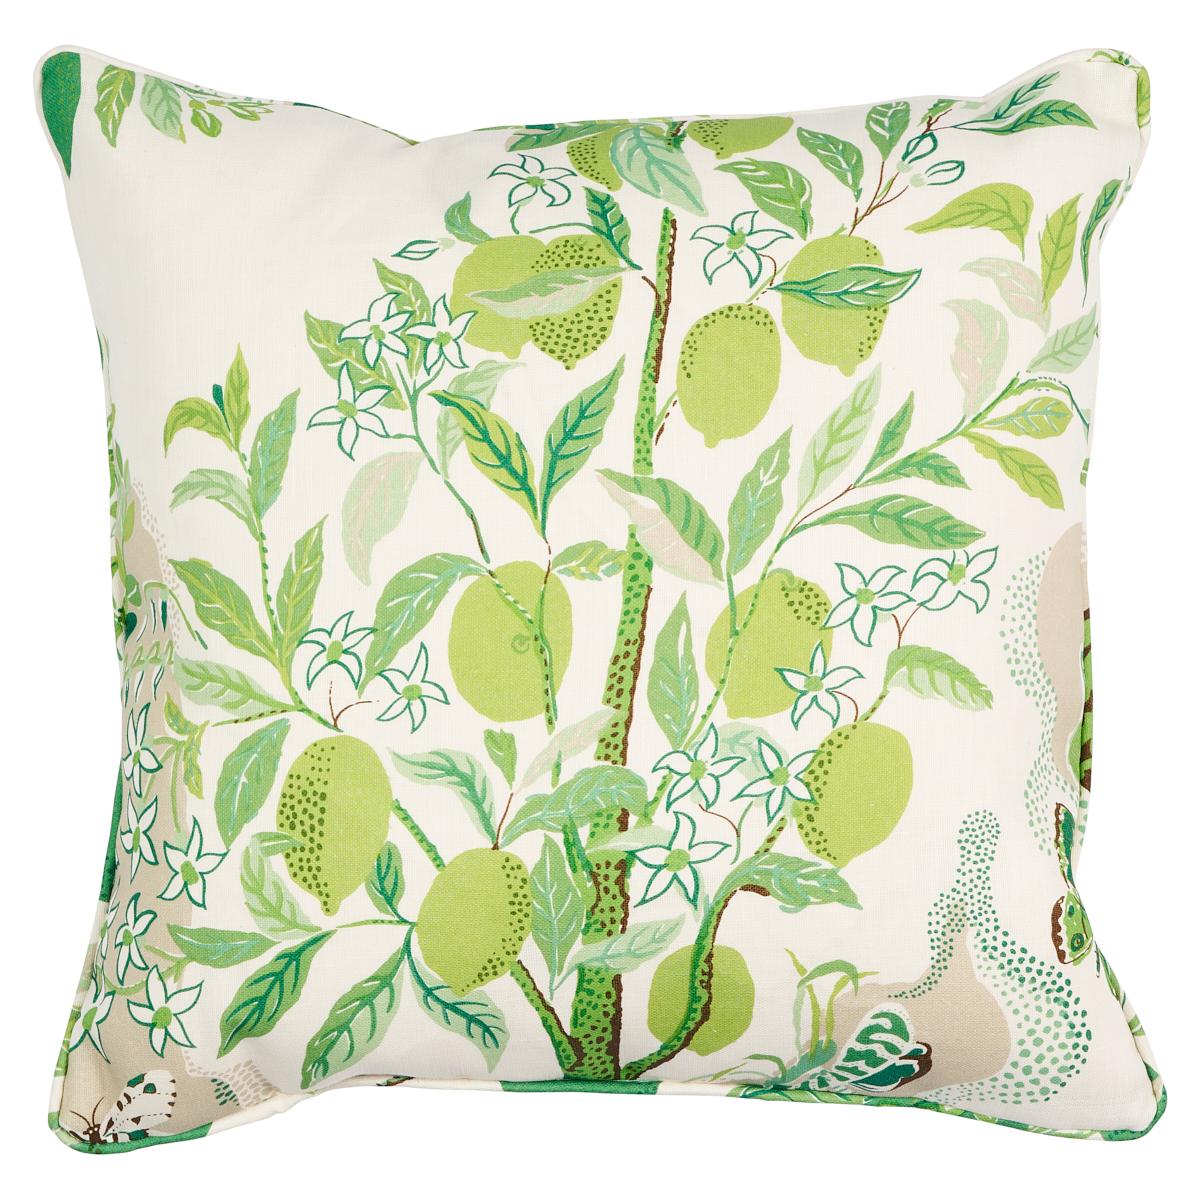 This pillow features Citrus Garden Indoor/Outdoor with a self welt finish. Charming and whimsical, Josef Frank's beloved 1947 print is a colorful, cheery addition to outdoor décor. Pillow includes a polyfill insert and hidden zipper closure.

*If